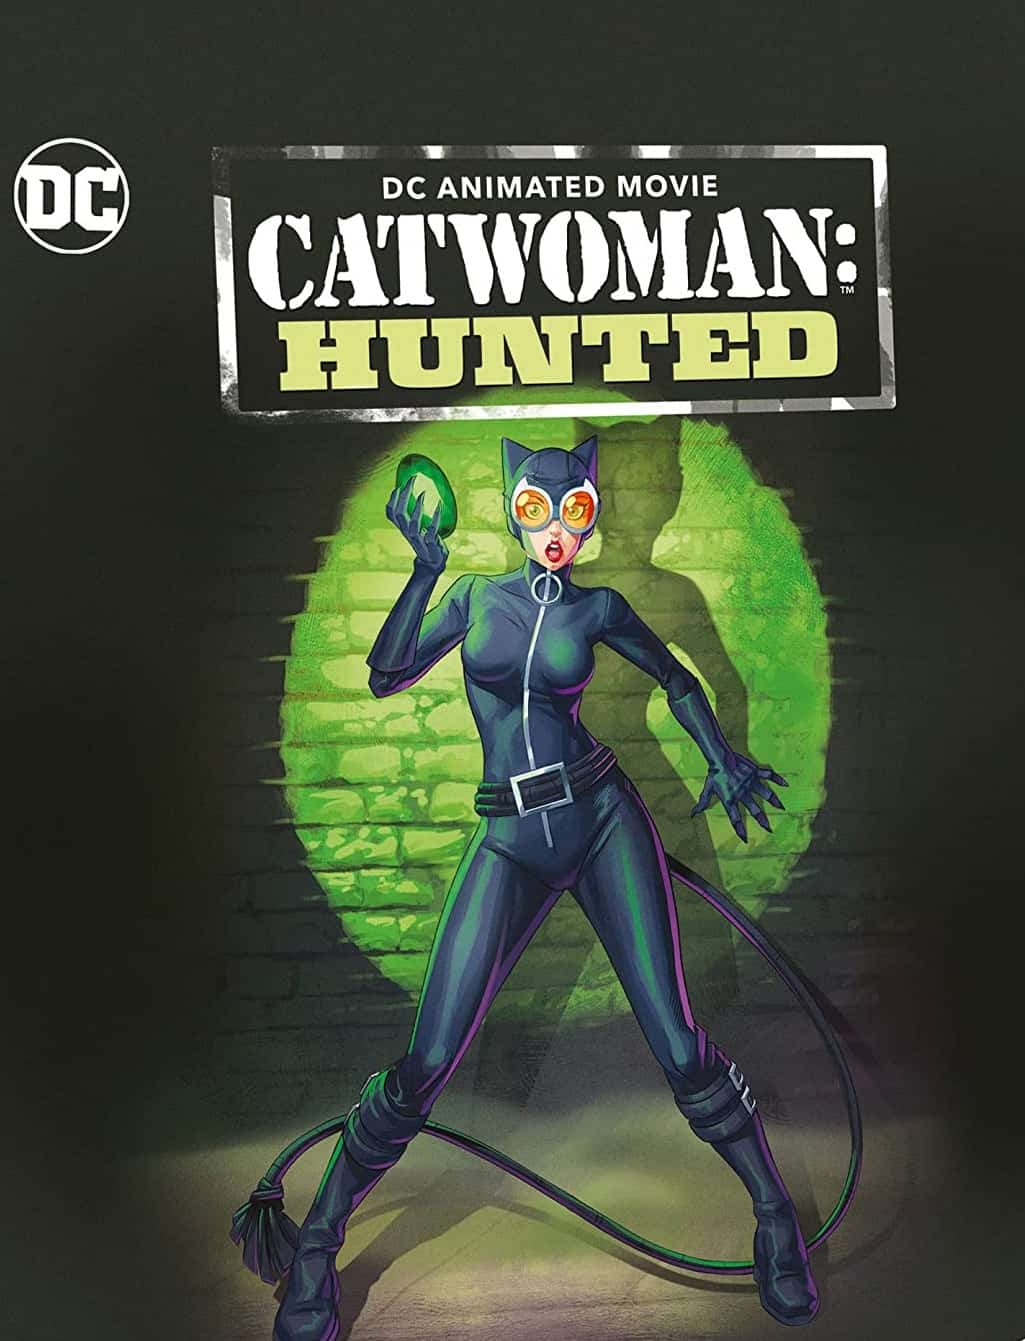 Catwoman Hunted: Girl on Girl Action - Comic Watch